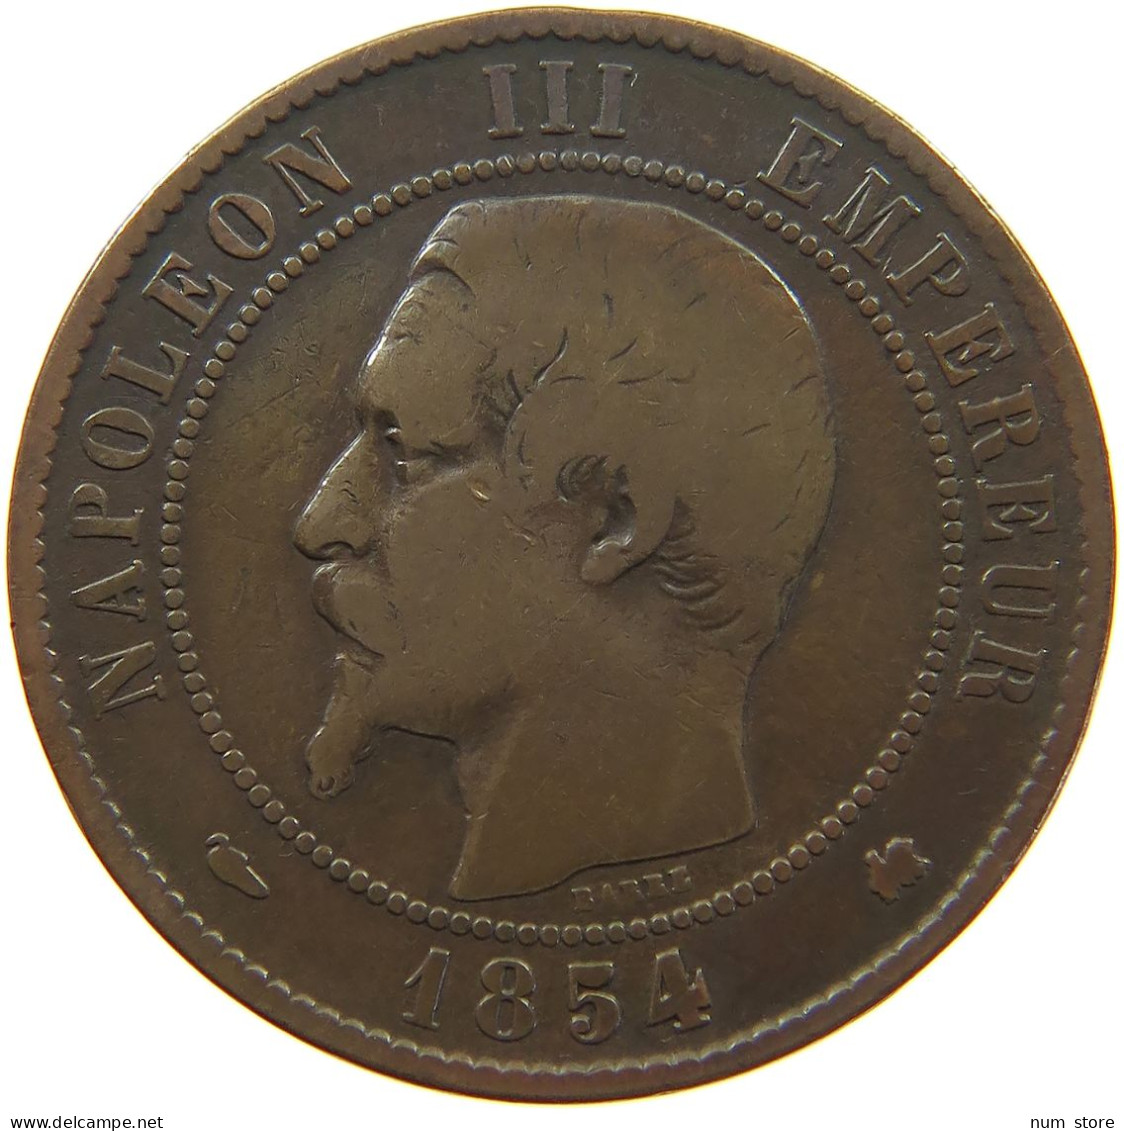 FRANCE 10 CENTIMES 1854 K Napoleon III. (1852-1870) #a059 0363 - 10 Centimes